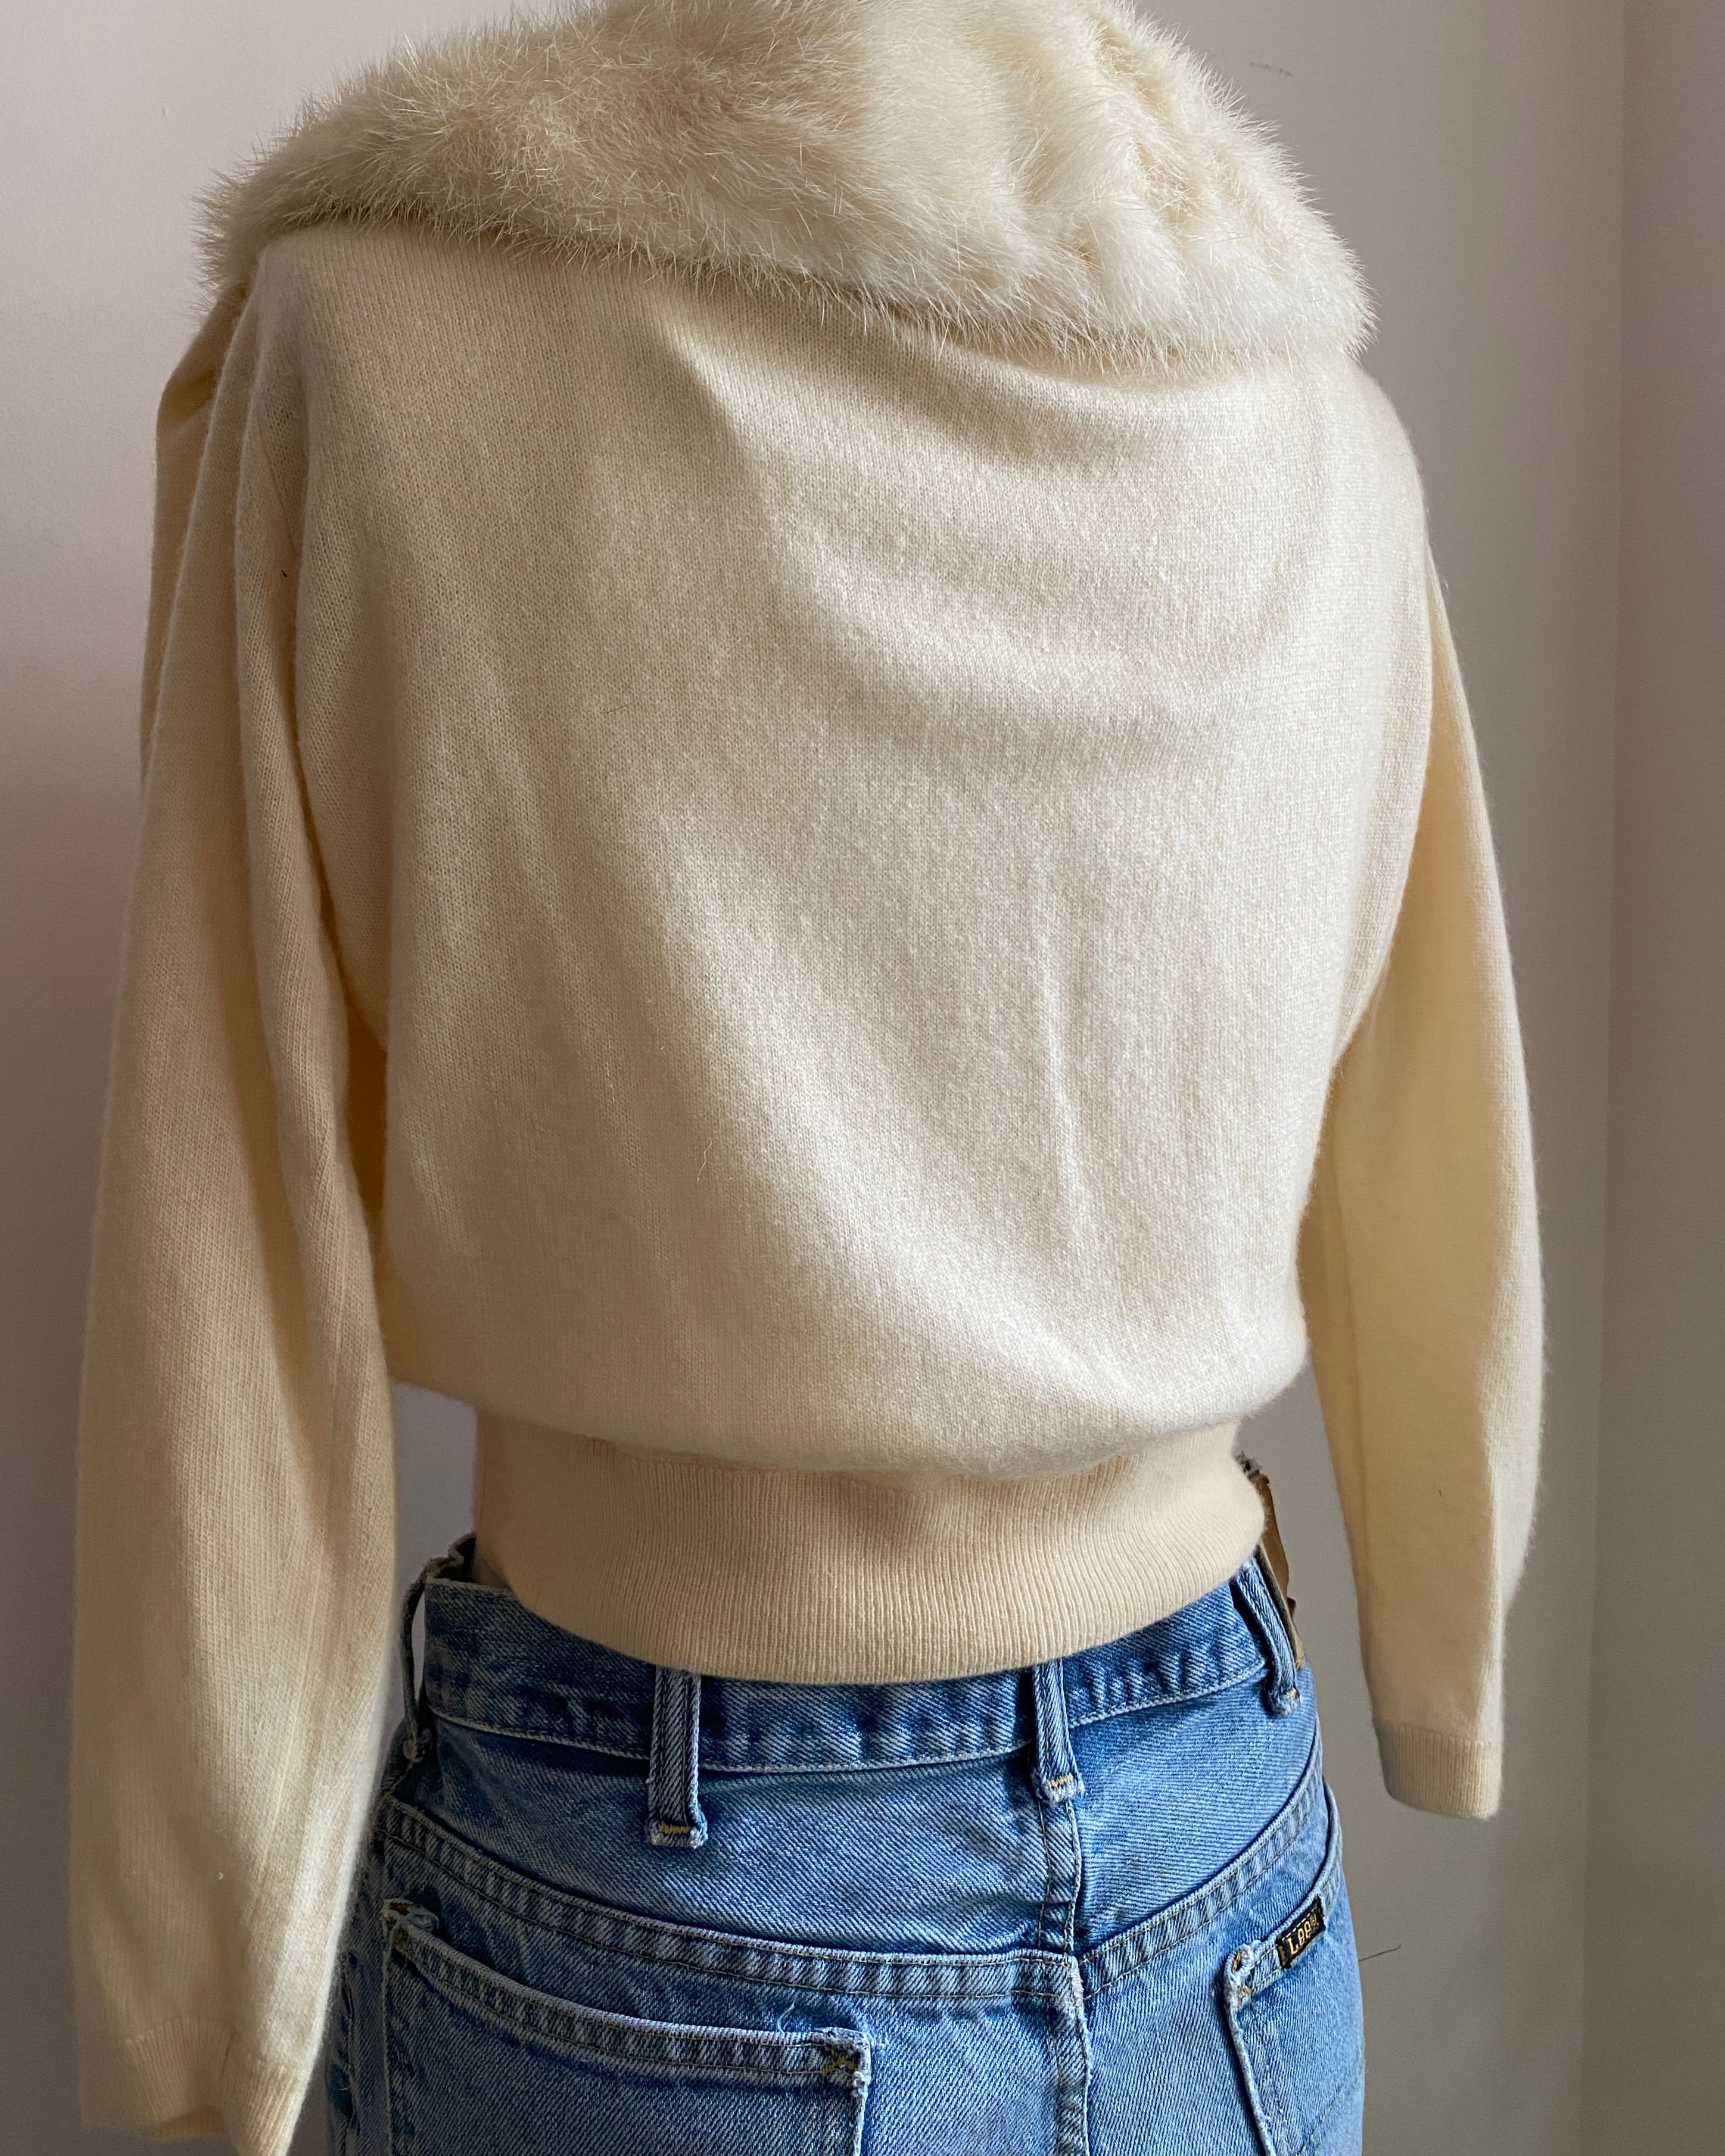 Vintage 1950s BALLANTYNE for Holt Renfrew 100% Cream Cashmere Cardigan With Matching Mink Shawl Collar Made in Scotland S or SM 4 or 6